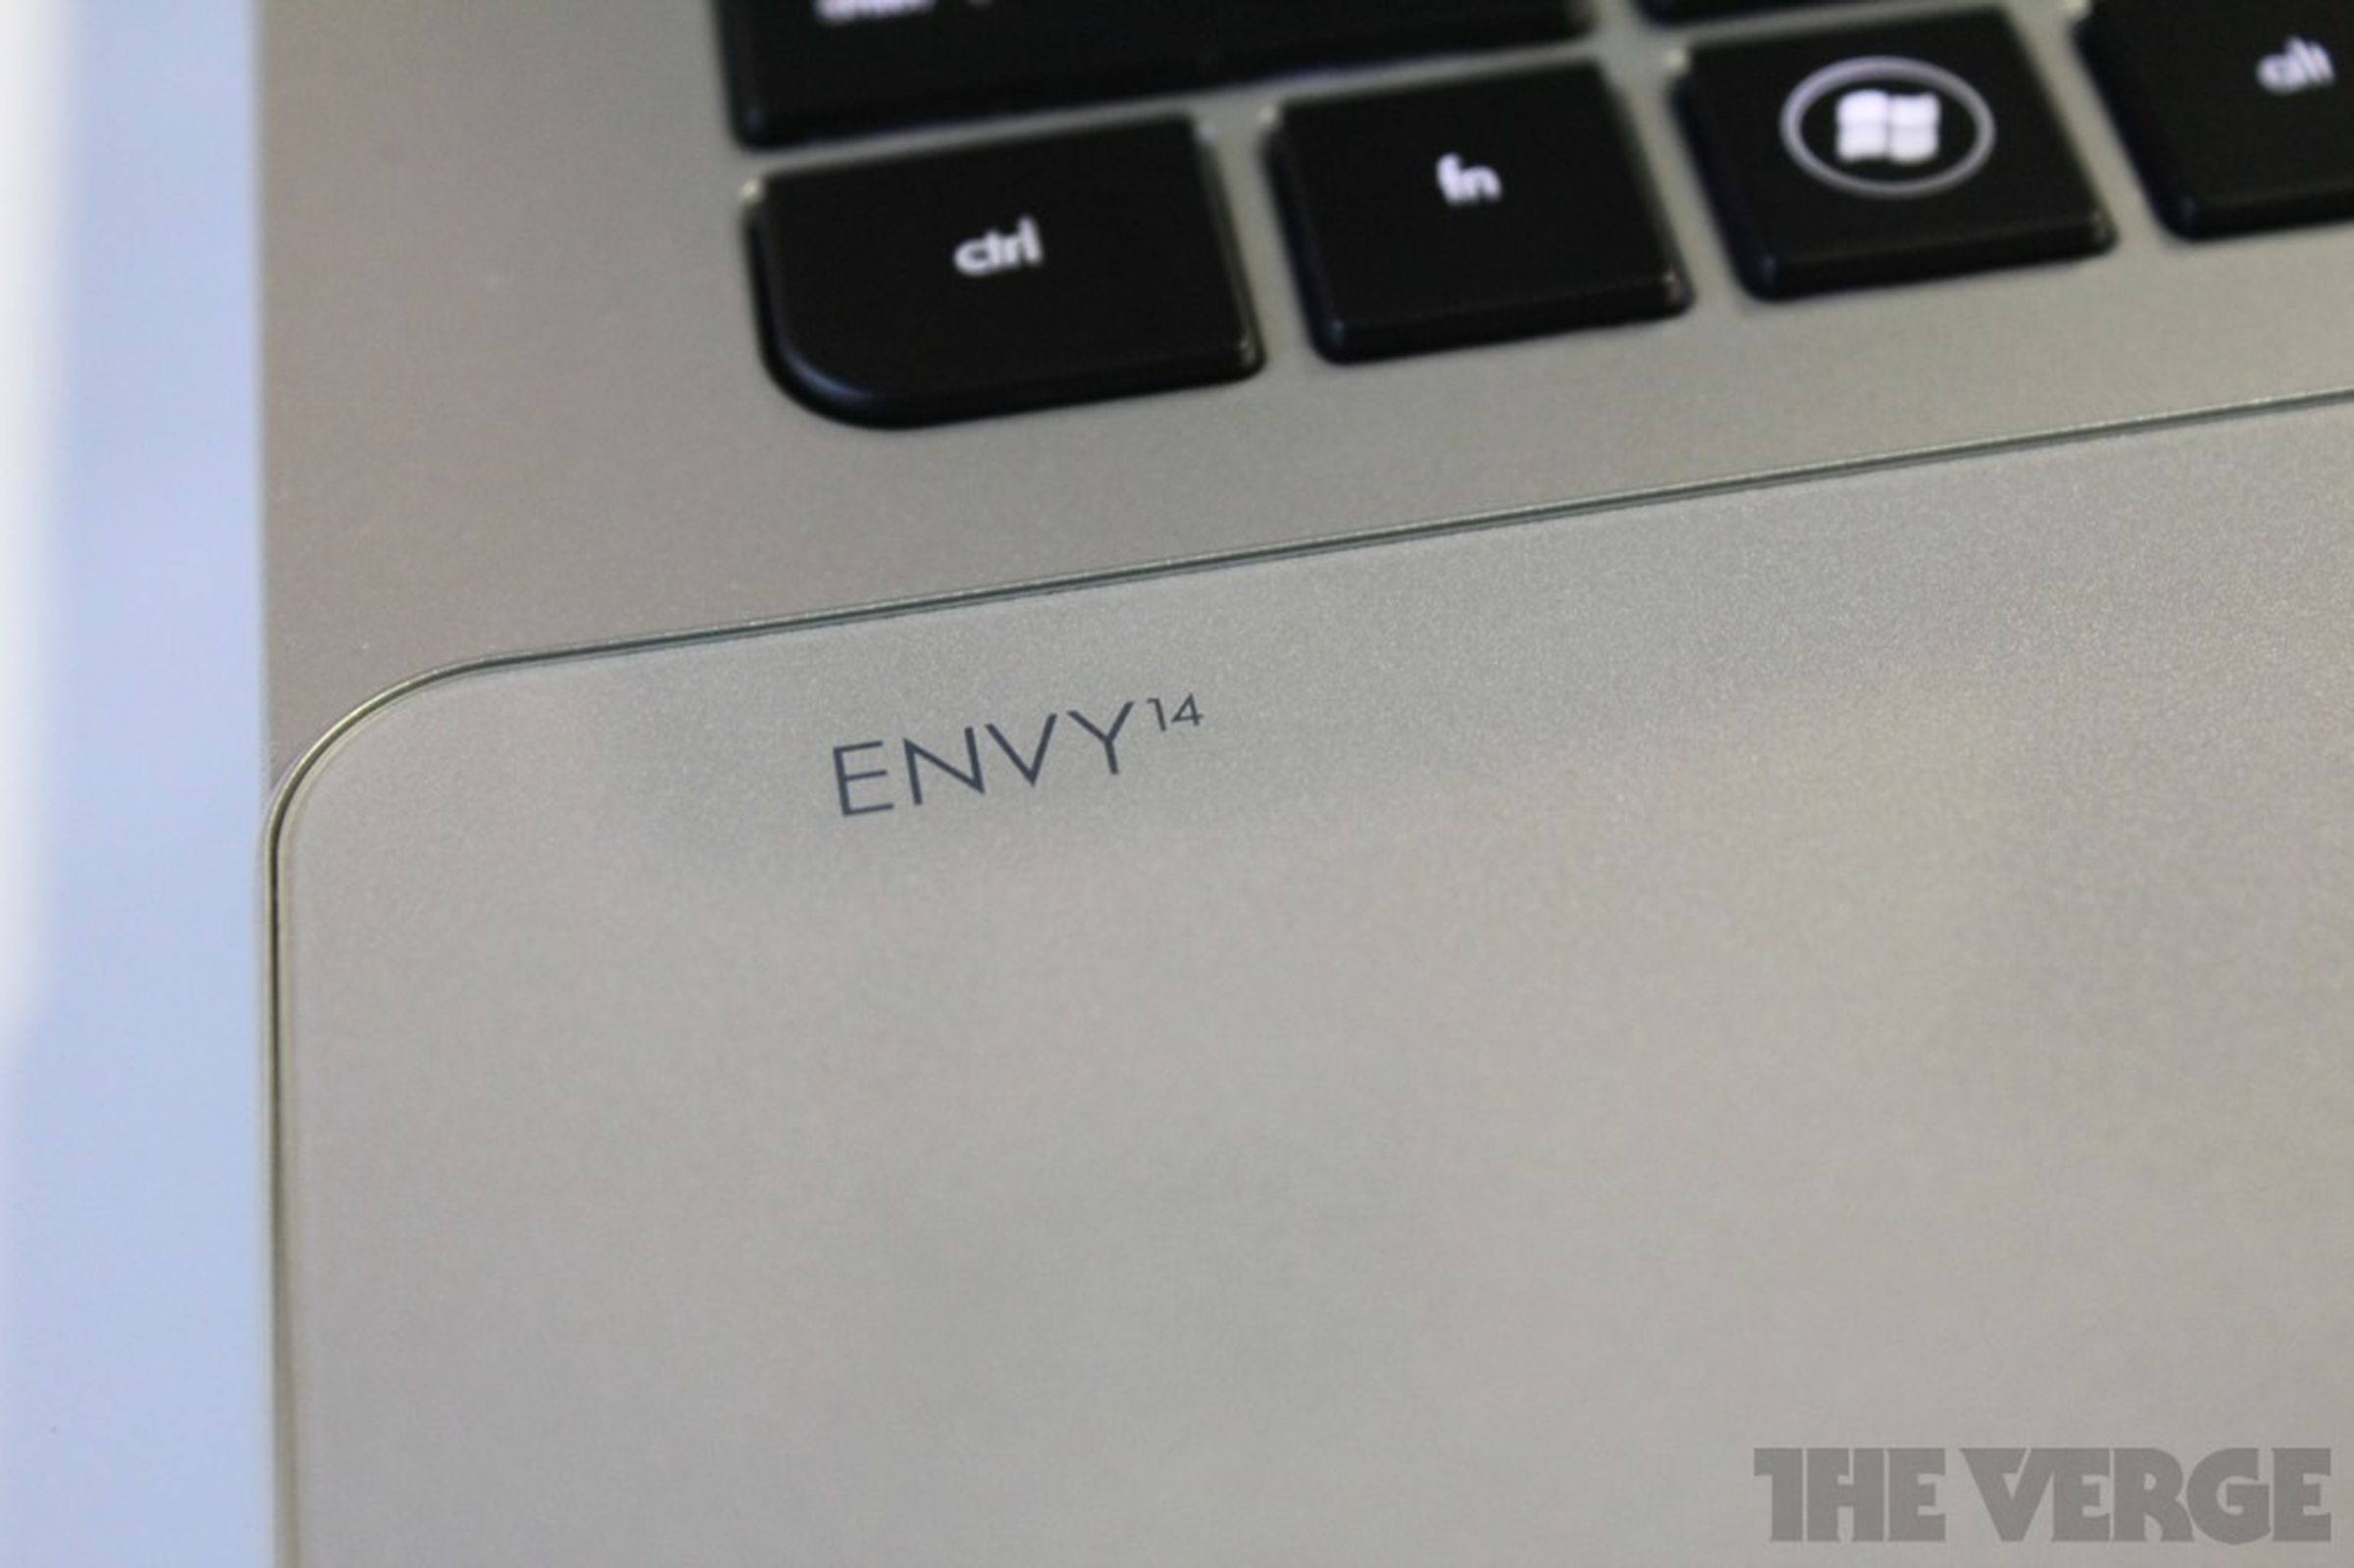 HP Envy 14 Spectre hands-on pictures 